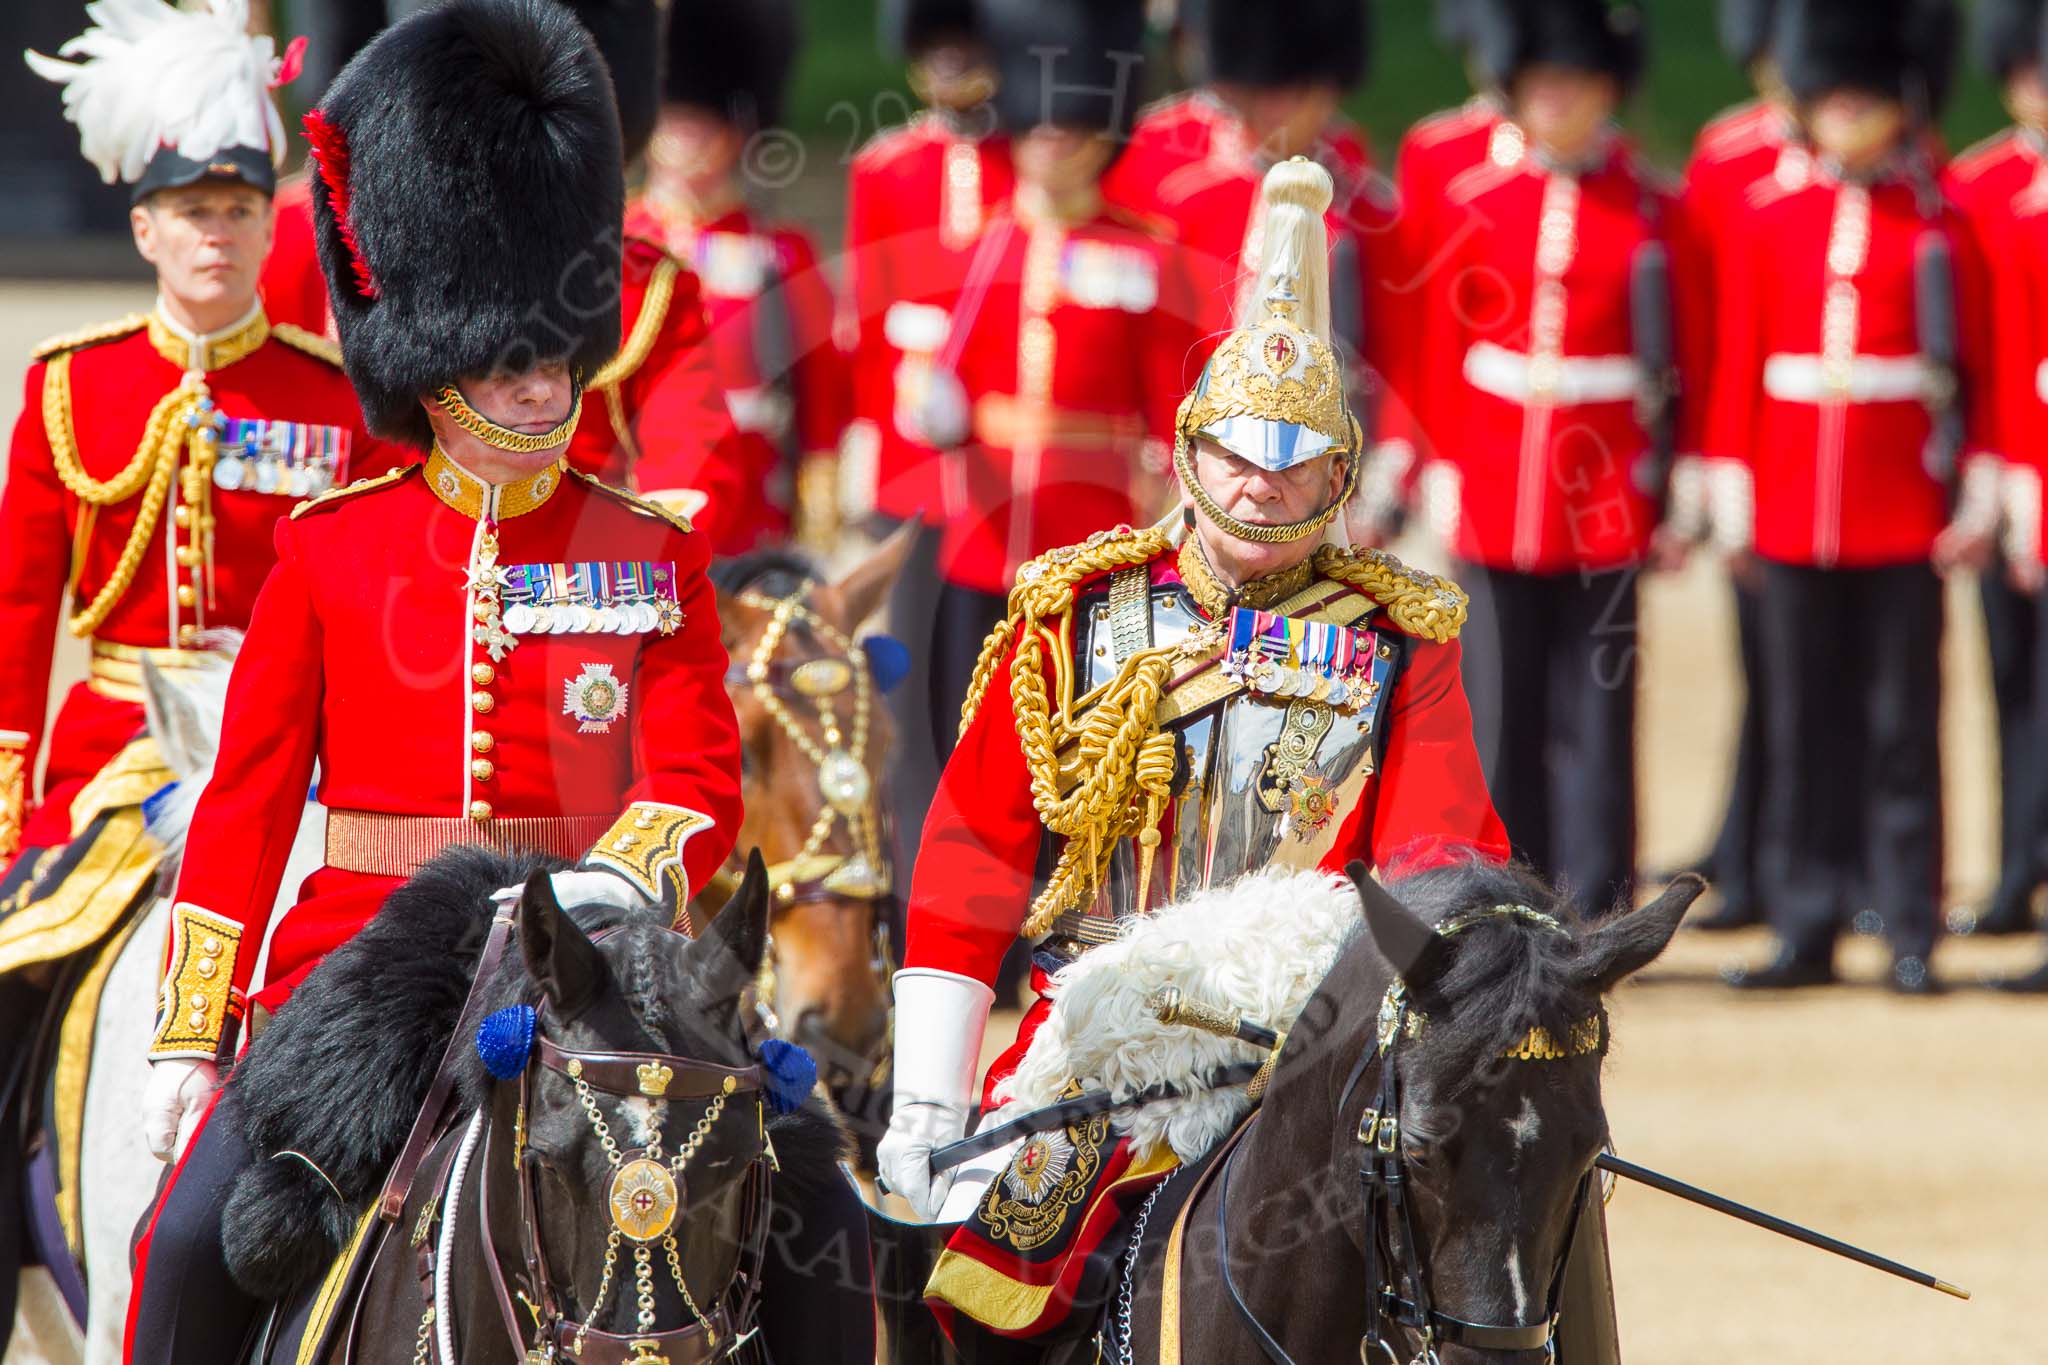 The Colonel's Review 2013: The Non-Royal Colonels, Colonel Coldstream Guards General Sir James Bucknall and Gold Stick in Waiting and Colonel Life Guards, Field Marshal the Lord Guthrie of Craigiebank..
Horse Guards Parade, Westminster,
London SW1,

United Kingdom,
on 08 June 2013 at 11:06, image #403